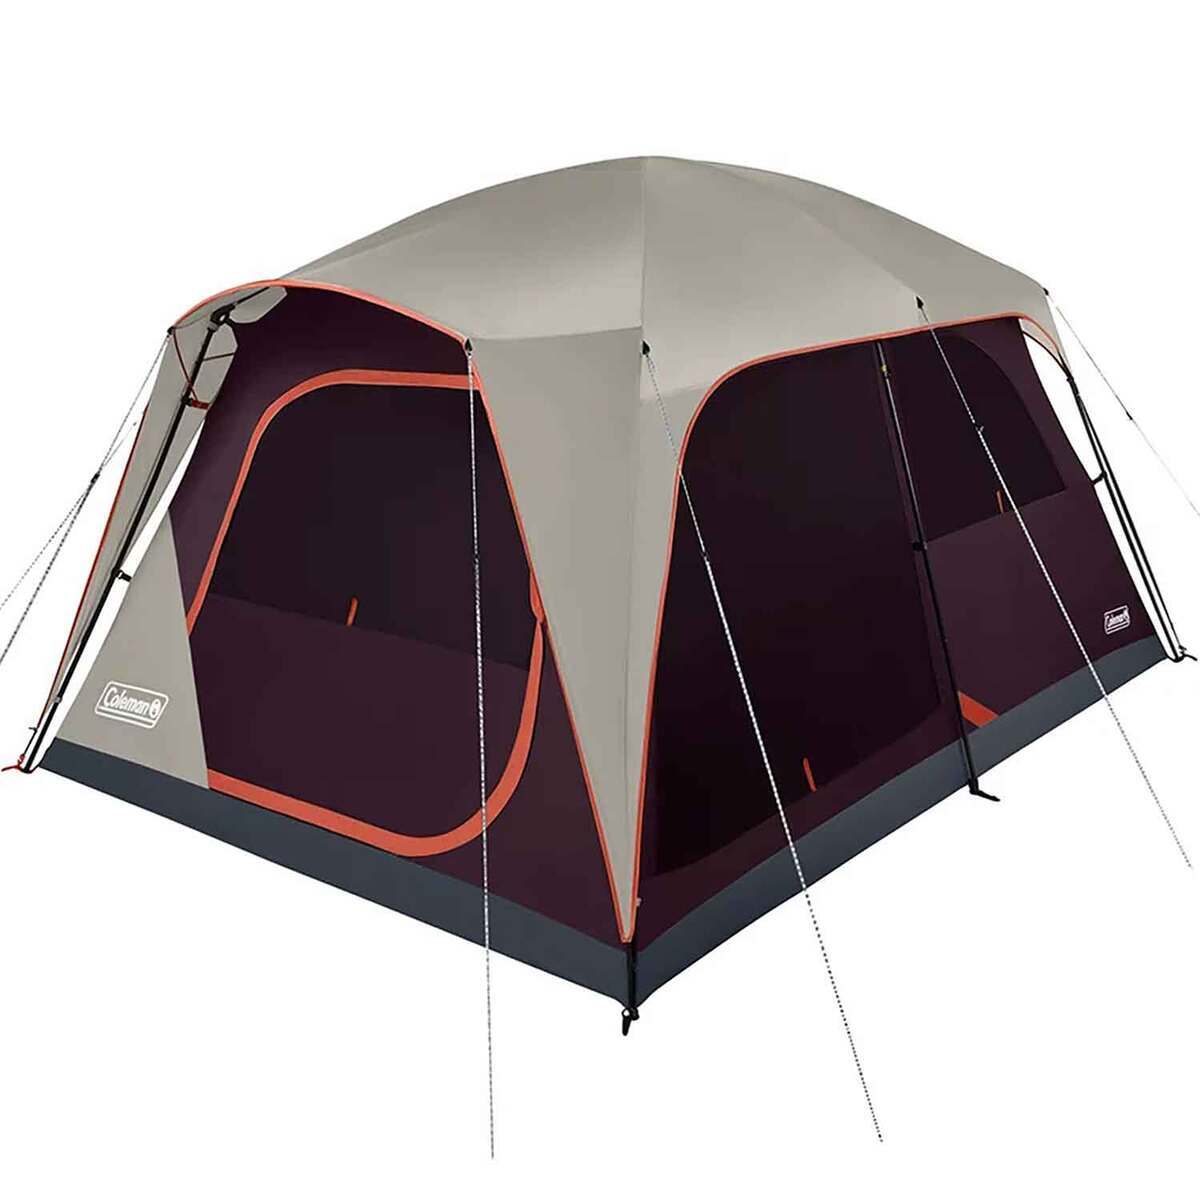 Coleman Skylodge 8-Person Camping Tent - Blackberry | Sportsman's Warehouse